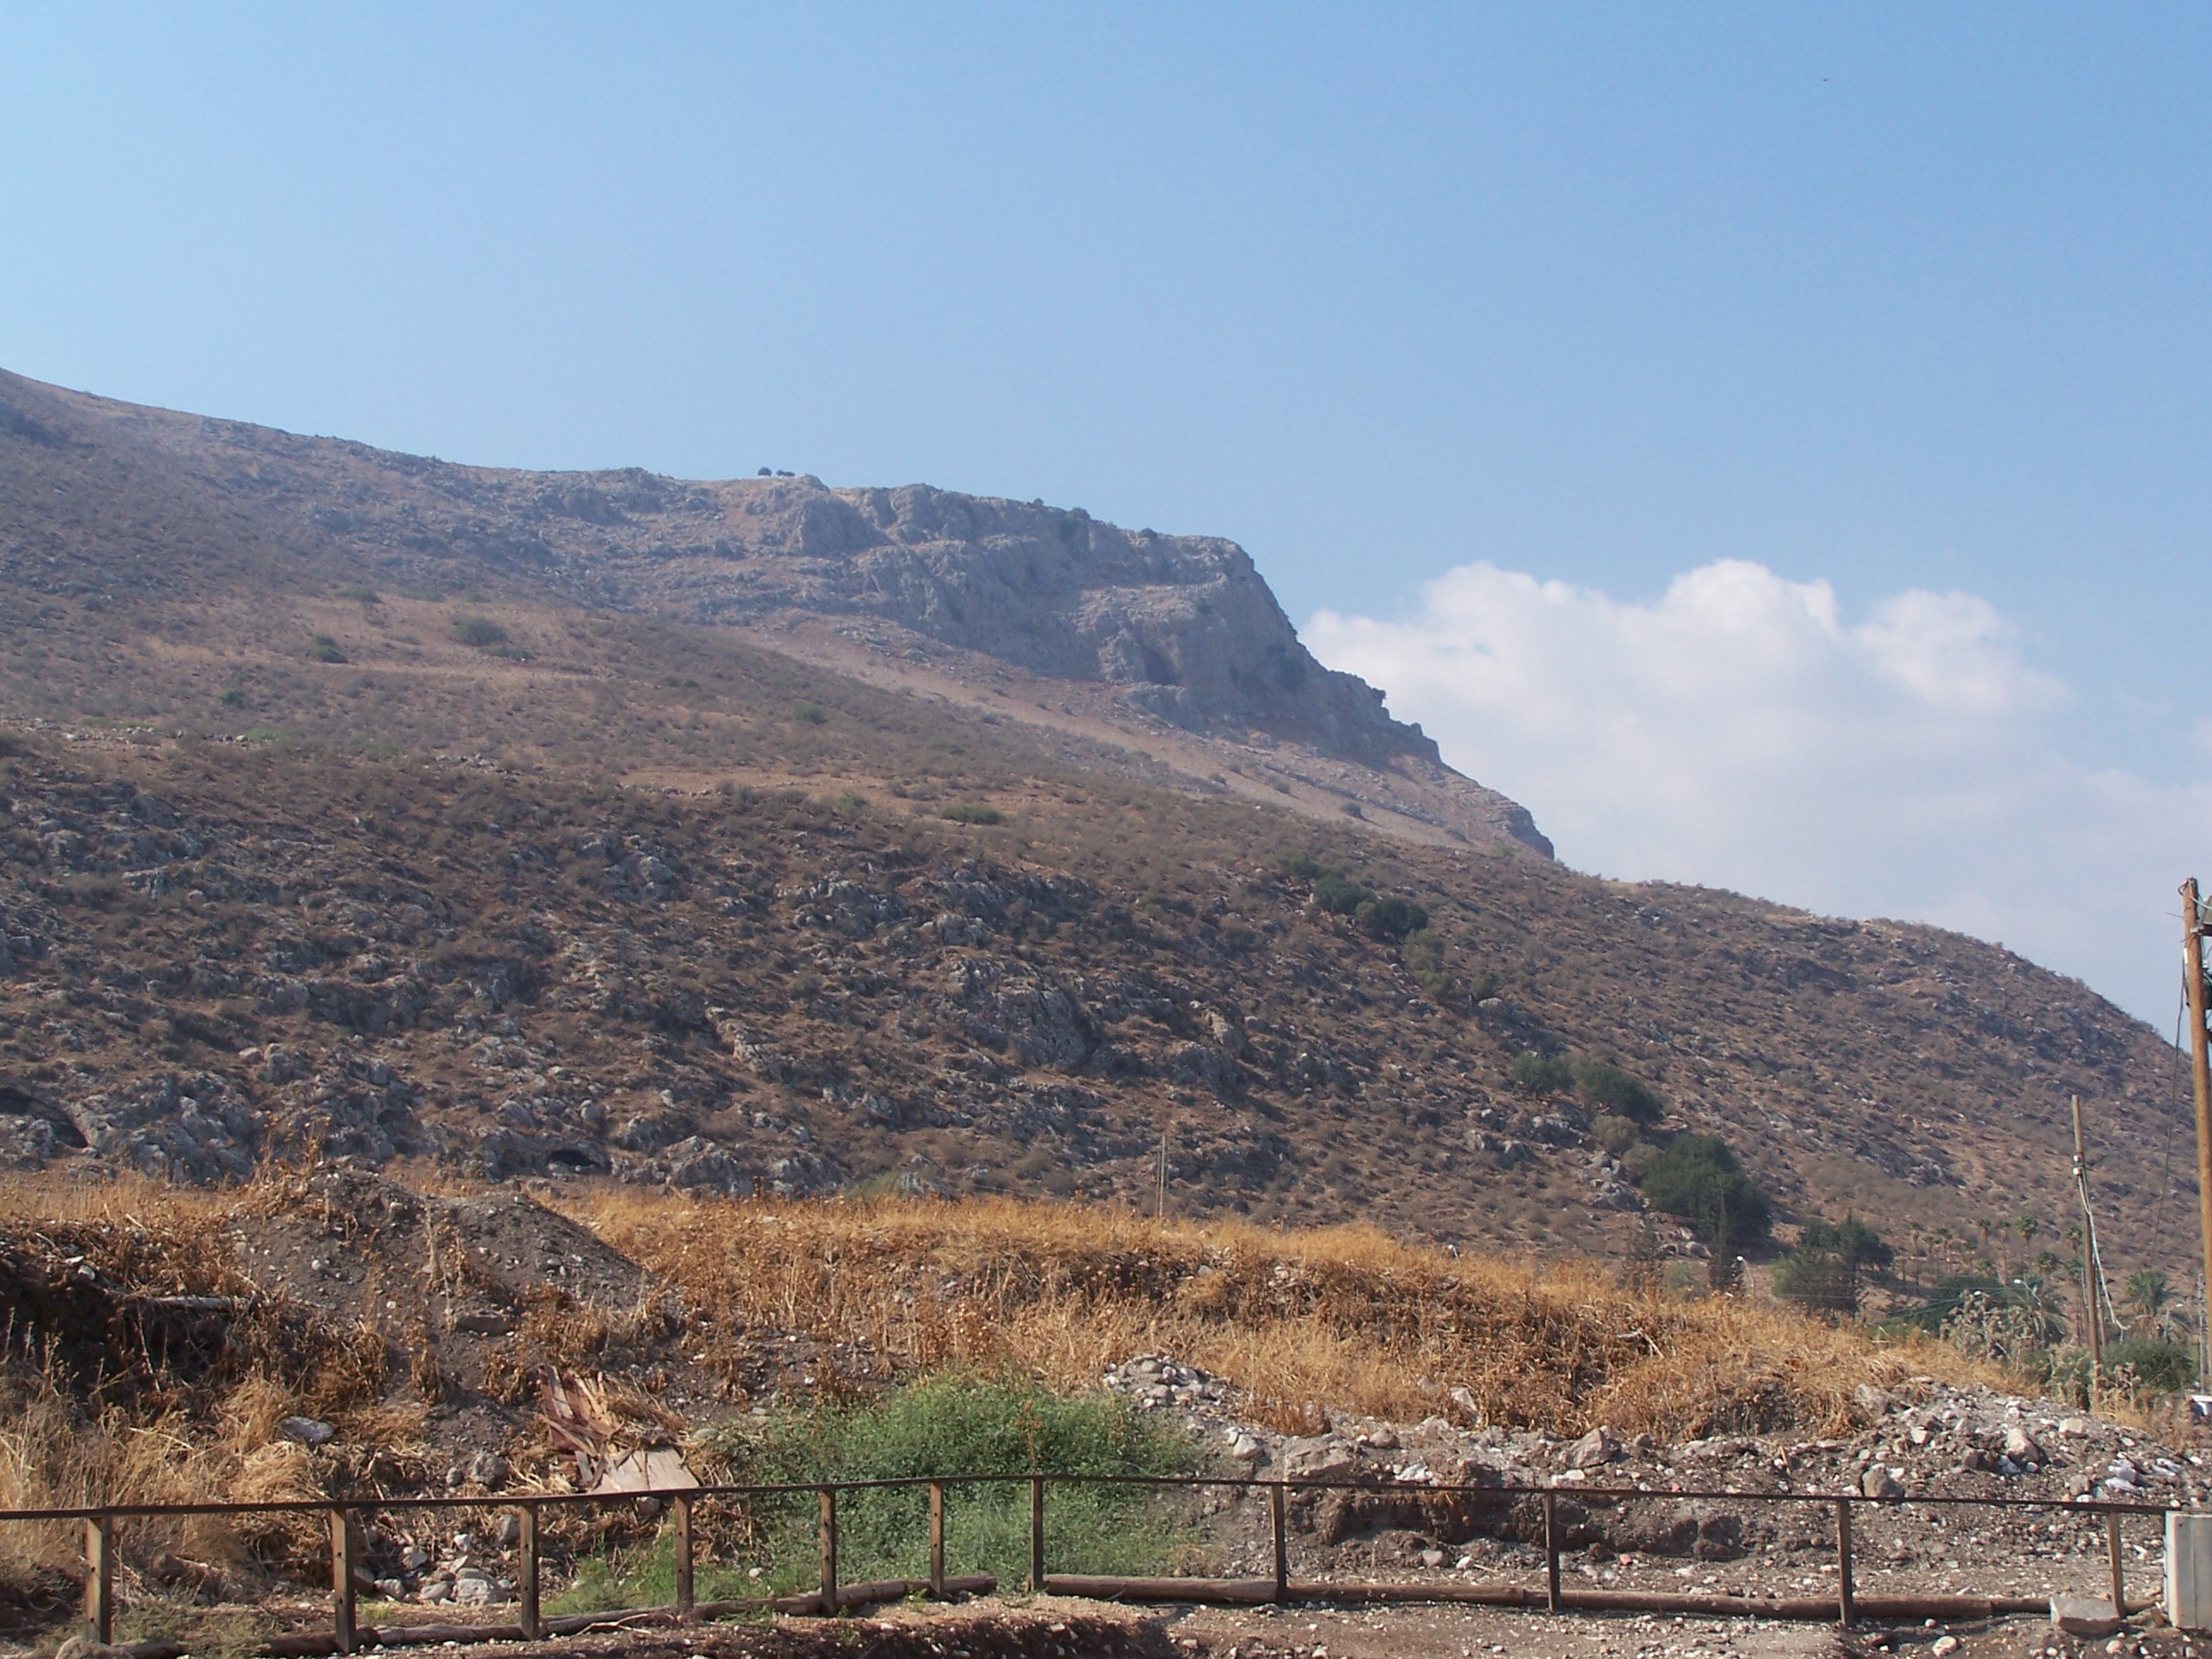 The cliffs of Arbel overshadow the site of Magdala. Image courtesy of Joshua N. Tilton.